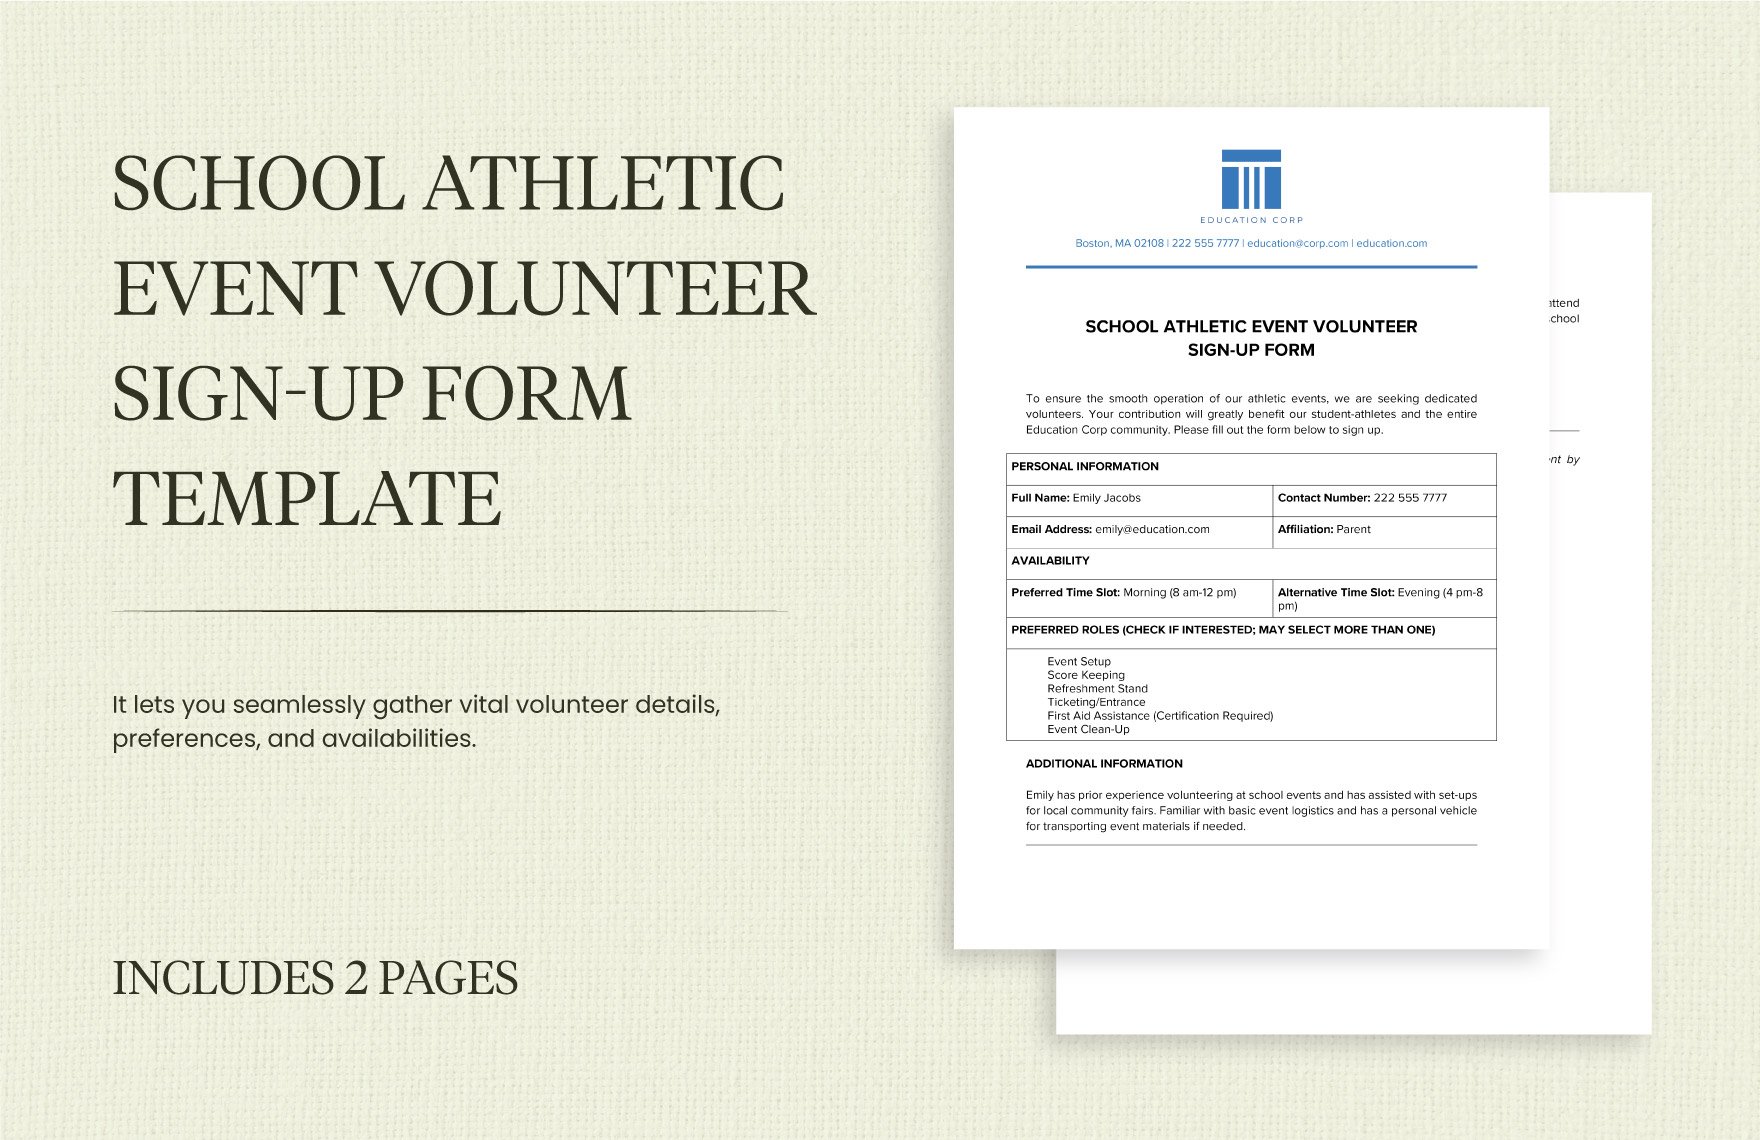 School Athletic Event Volunteer Sign-Up Form Template